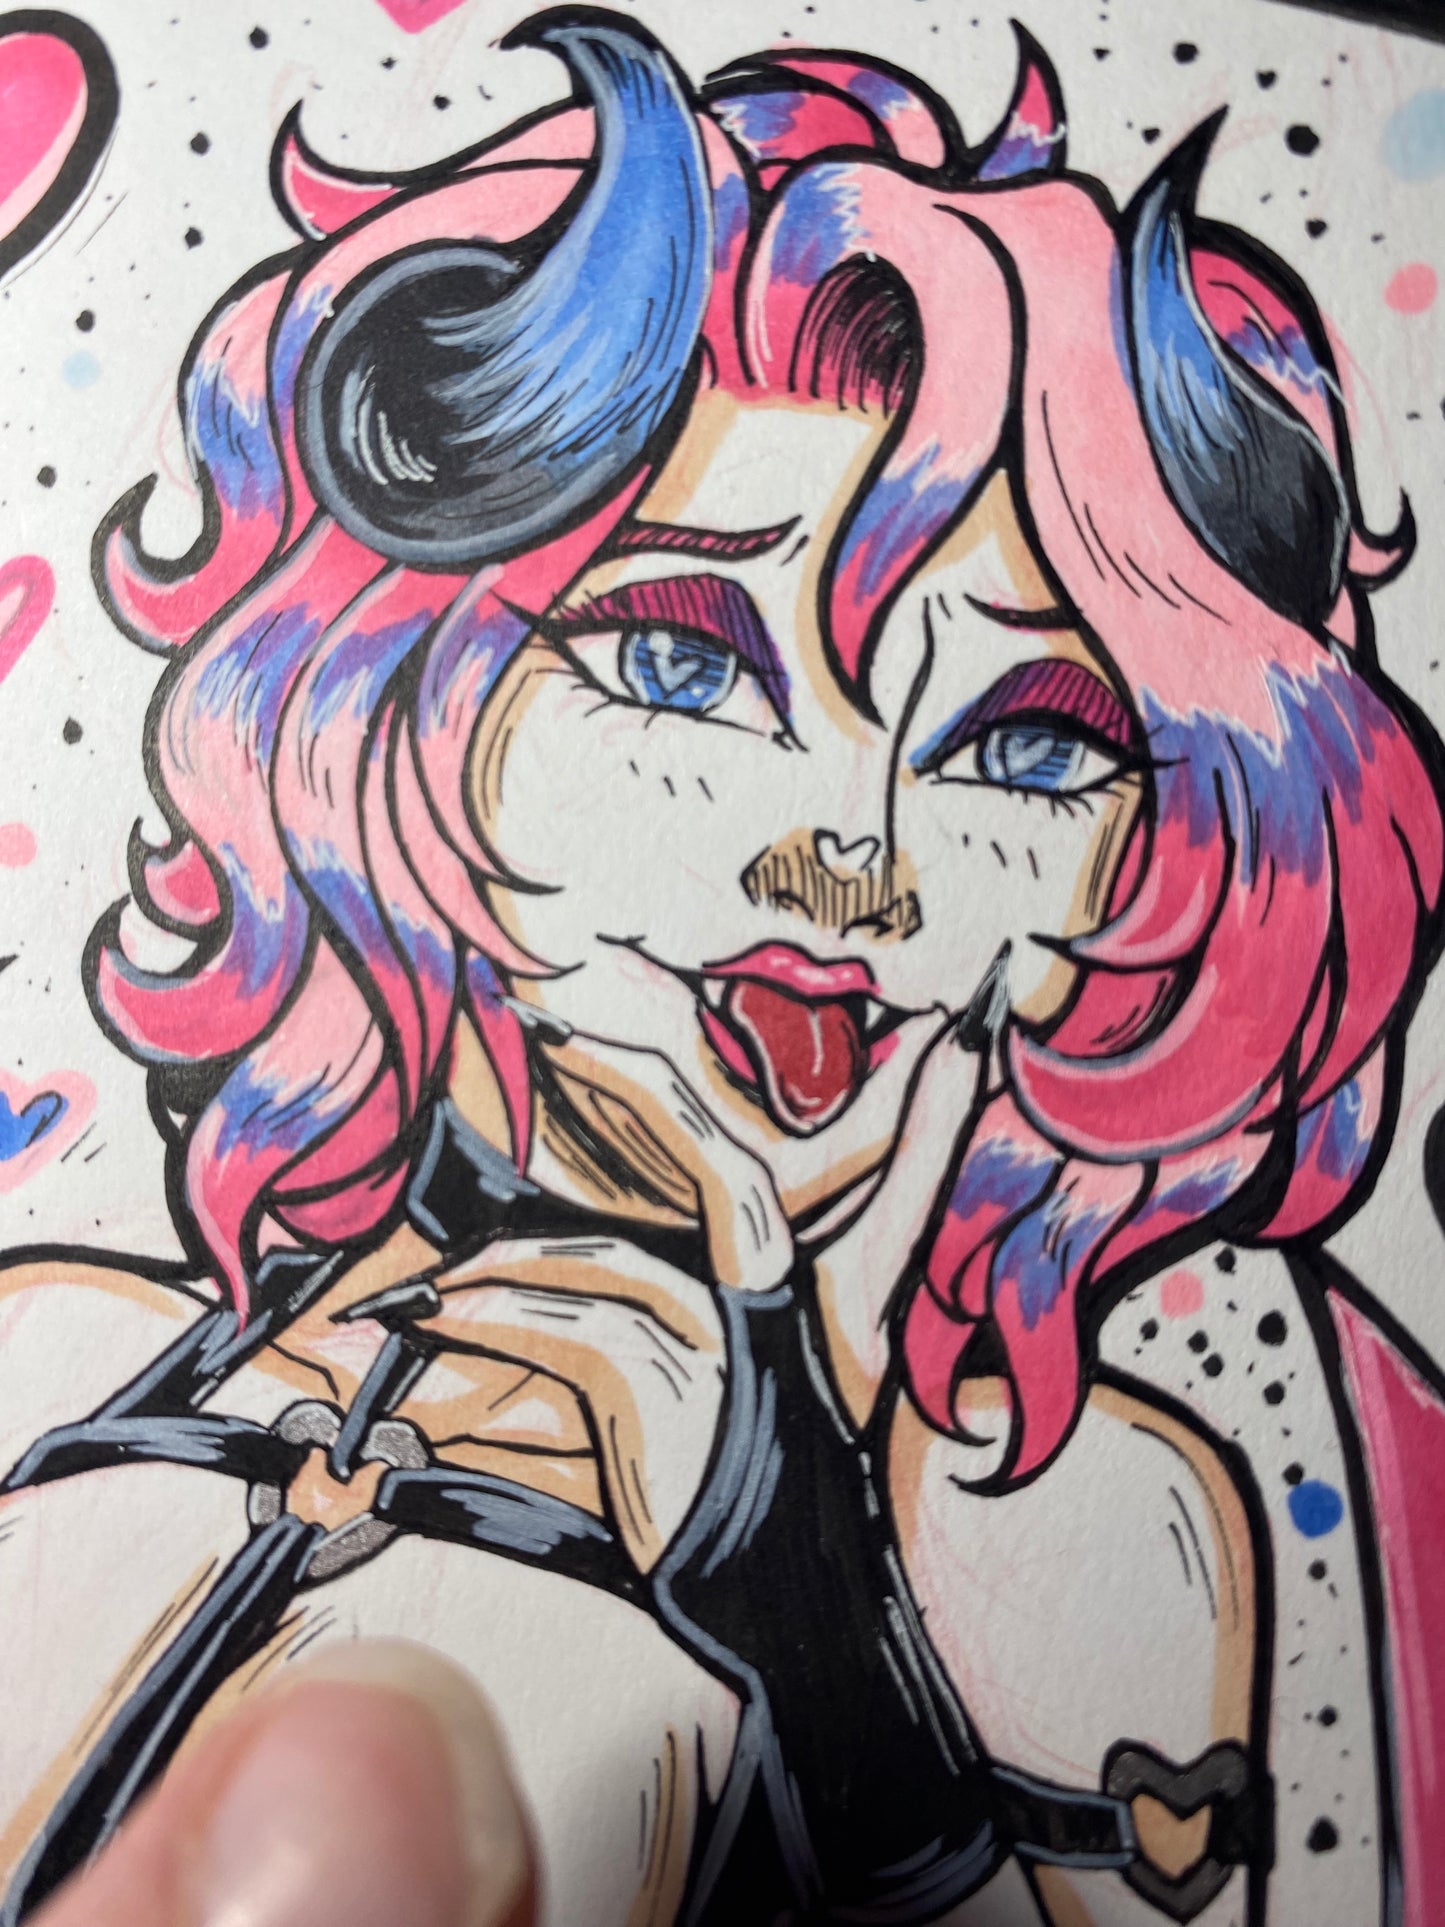 Lilith - NSFW Demon Original Character 5x7” Traditional Art